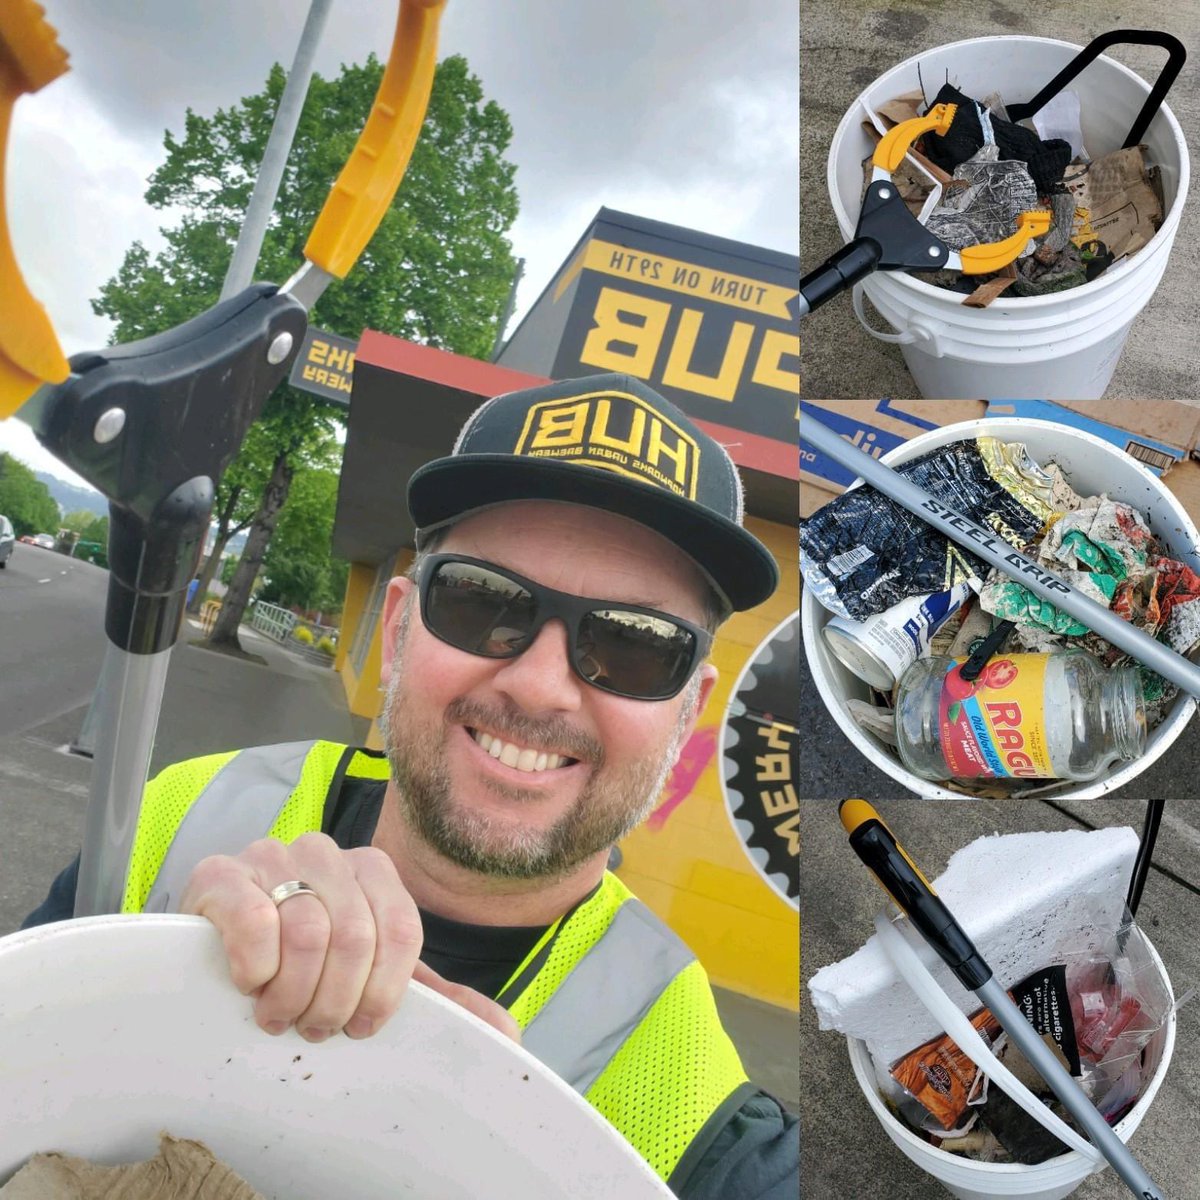 Recently, it was B Corporation Day Of Service for our team! We scattered our labor around the city. Fearless leader Christian Ettinger picked up 15 gallons of trash on our newly adopted 4 city blocks around the brewery - shout out to @adoptoneblock. Good clean fun!